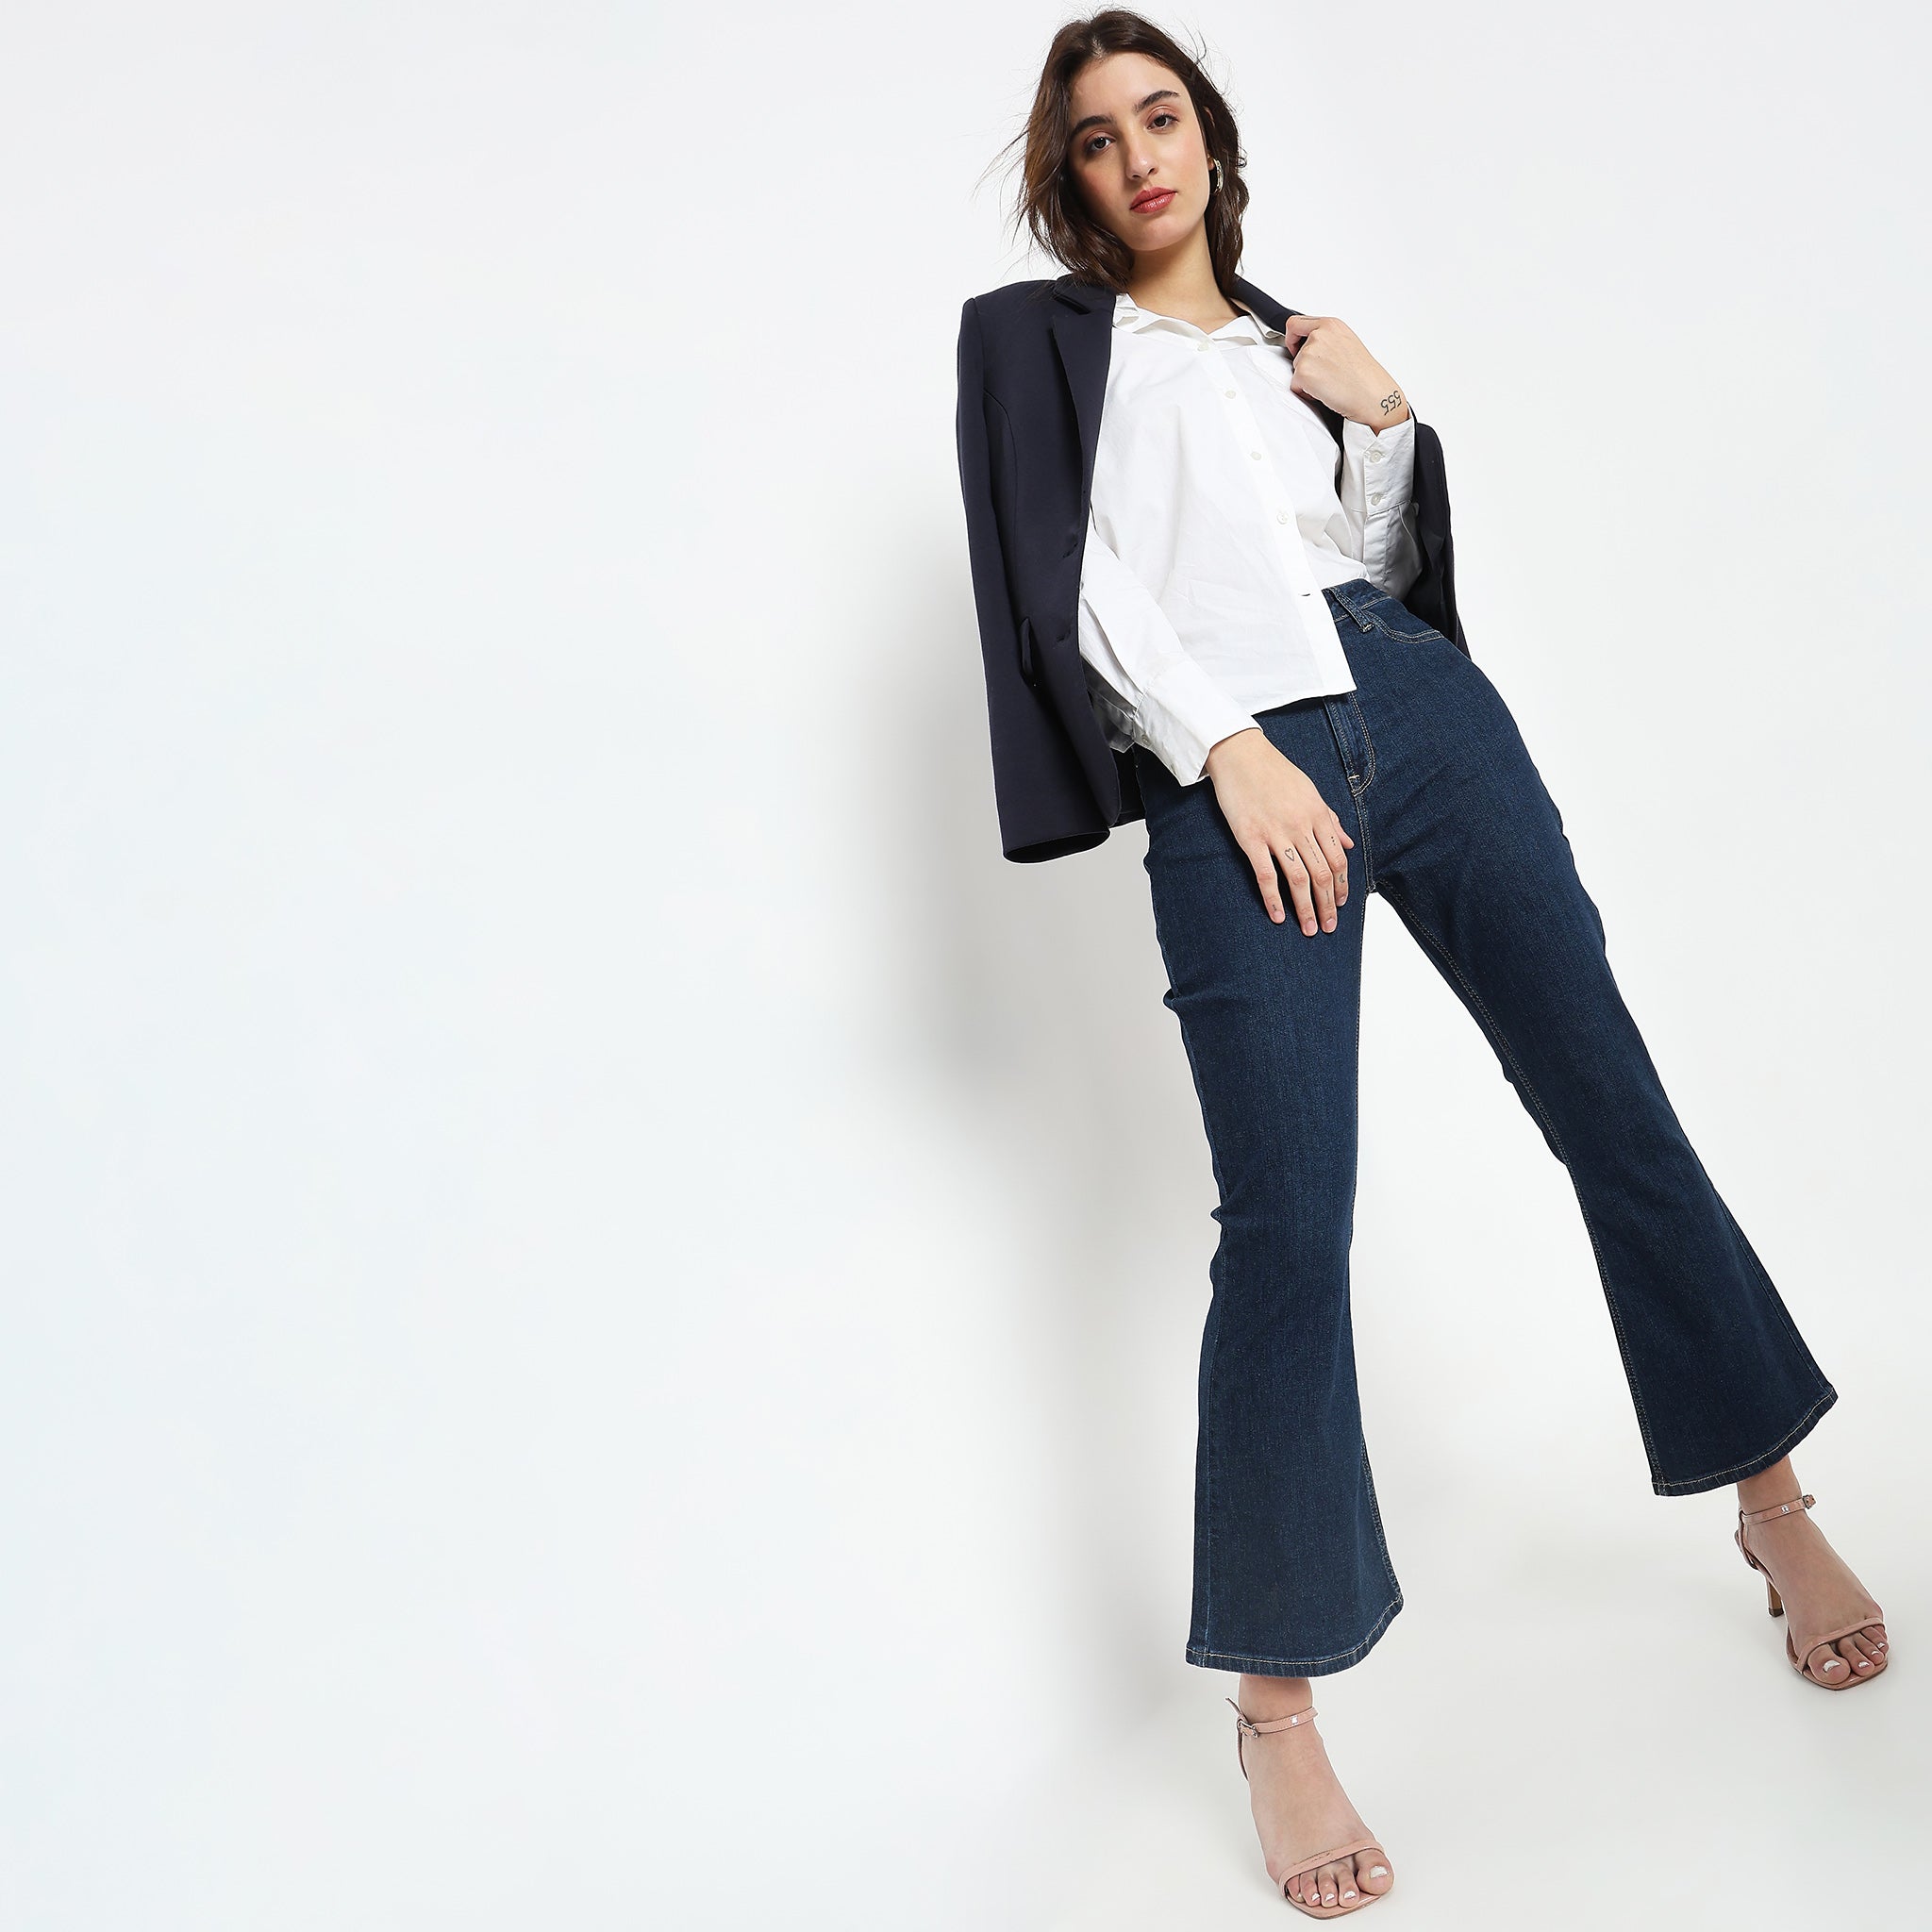 Only Jeans - Buy Only Jeans for Women Online in India at Myntra